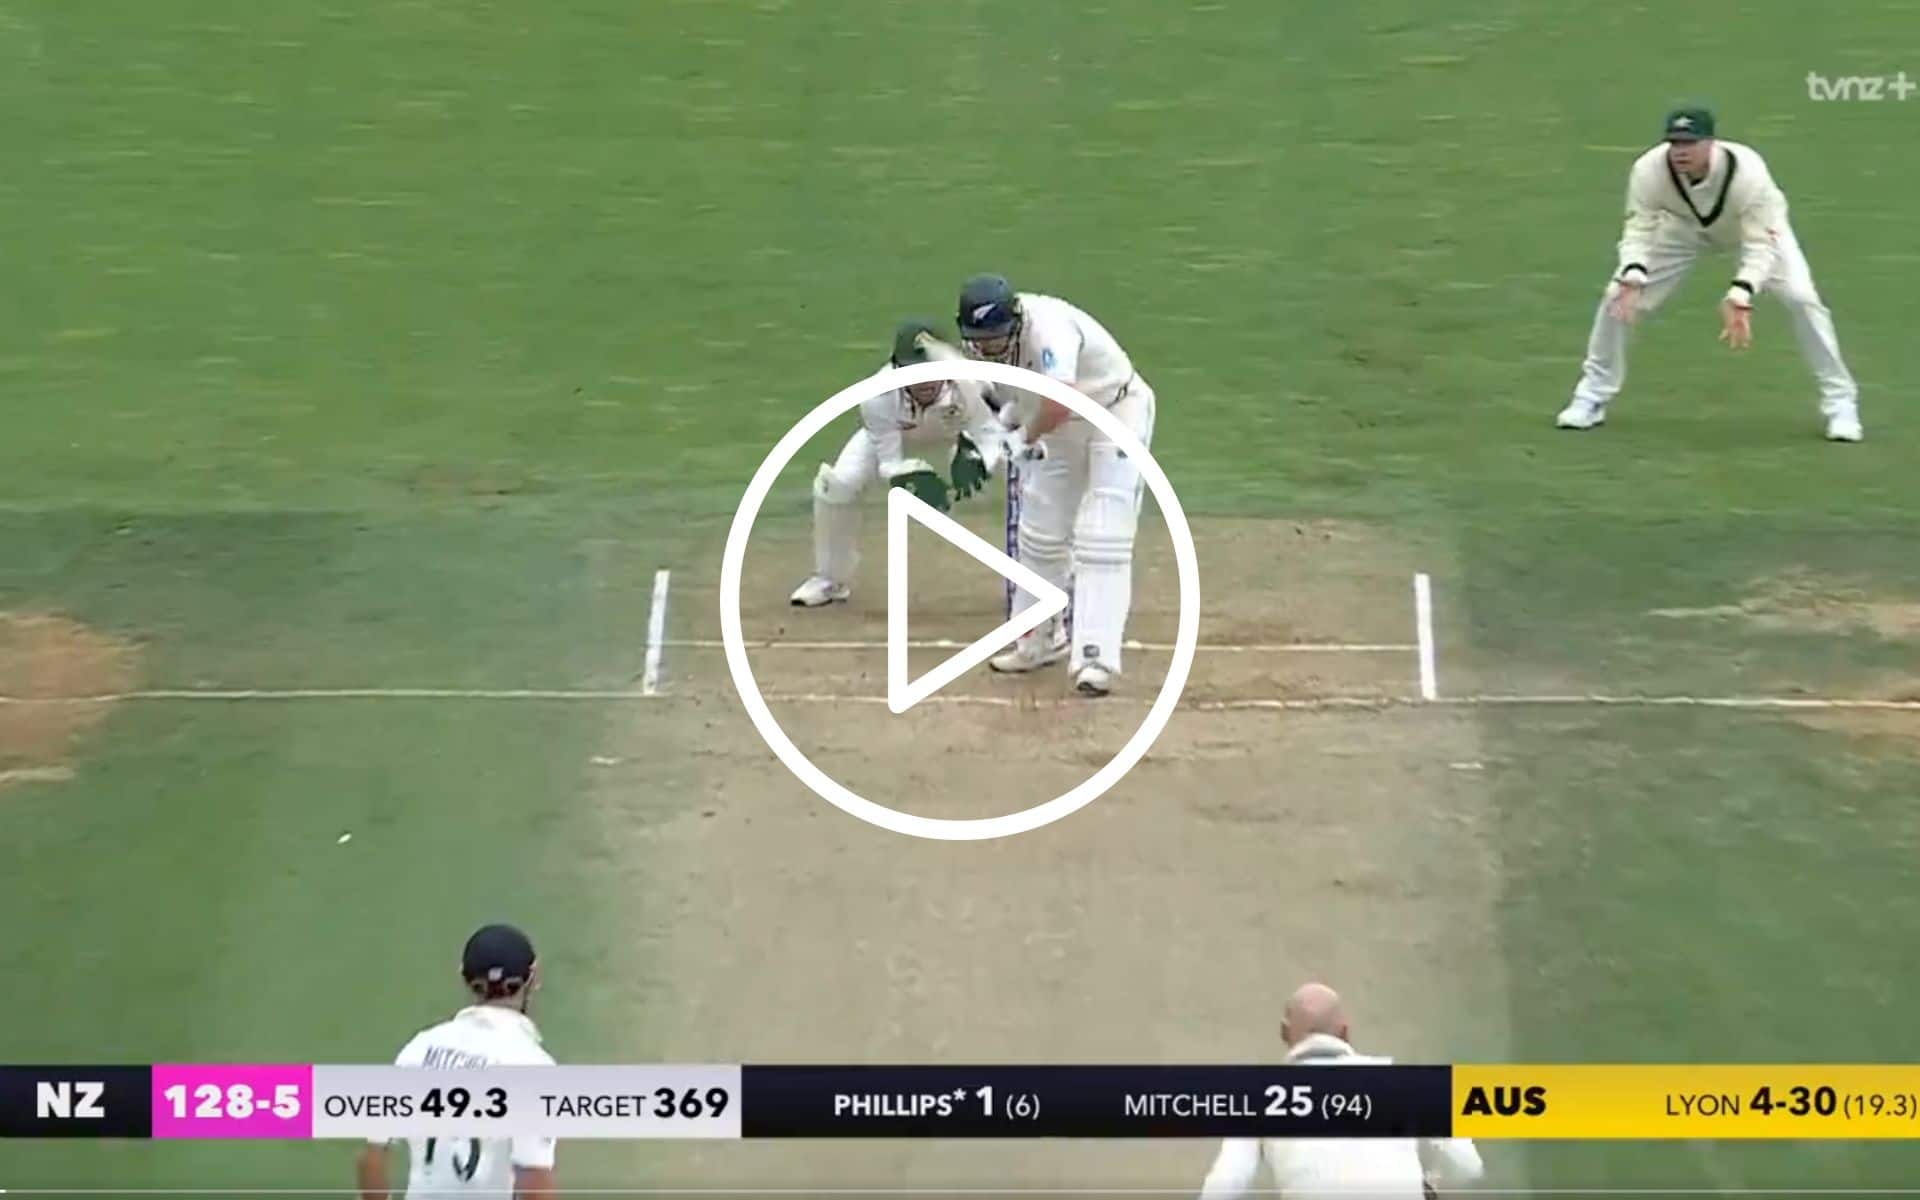 [Watch] Nathan Lyon Bags 24th Fifer With The Wicket Of Dangerous Glenn Phillips